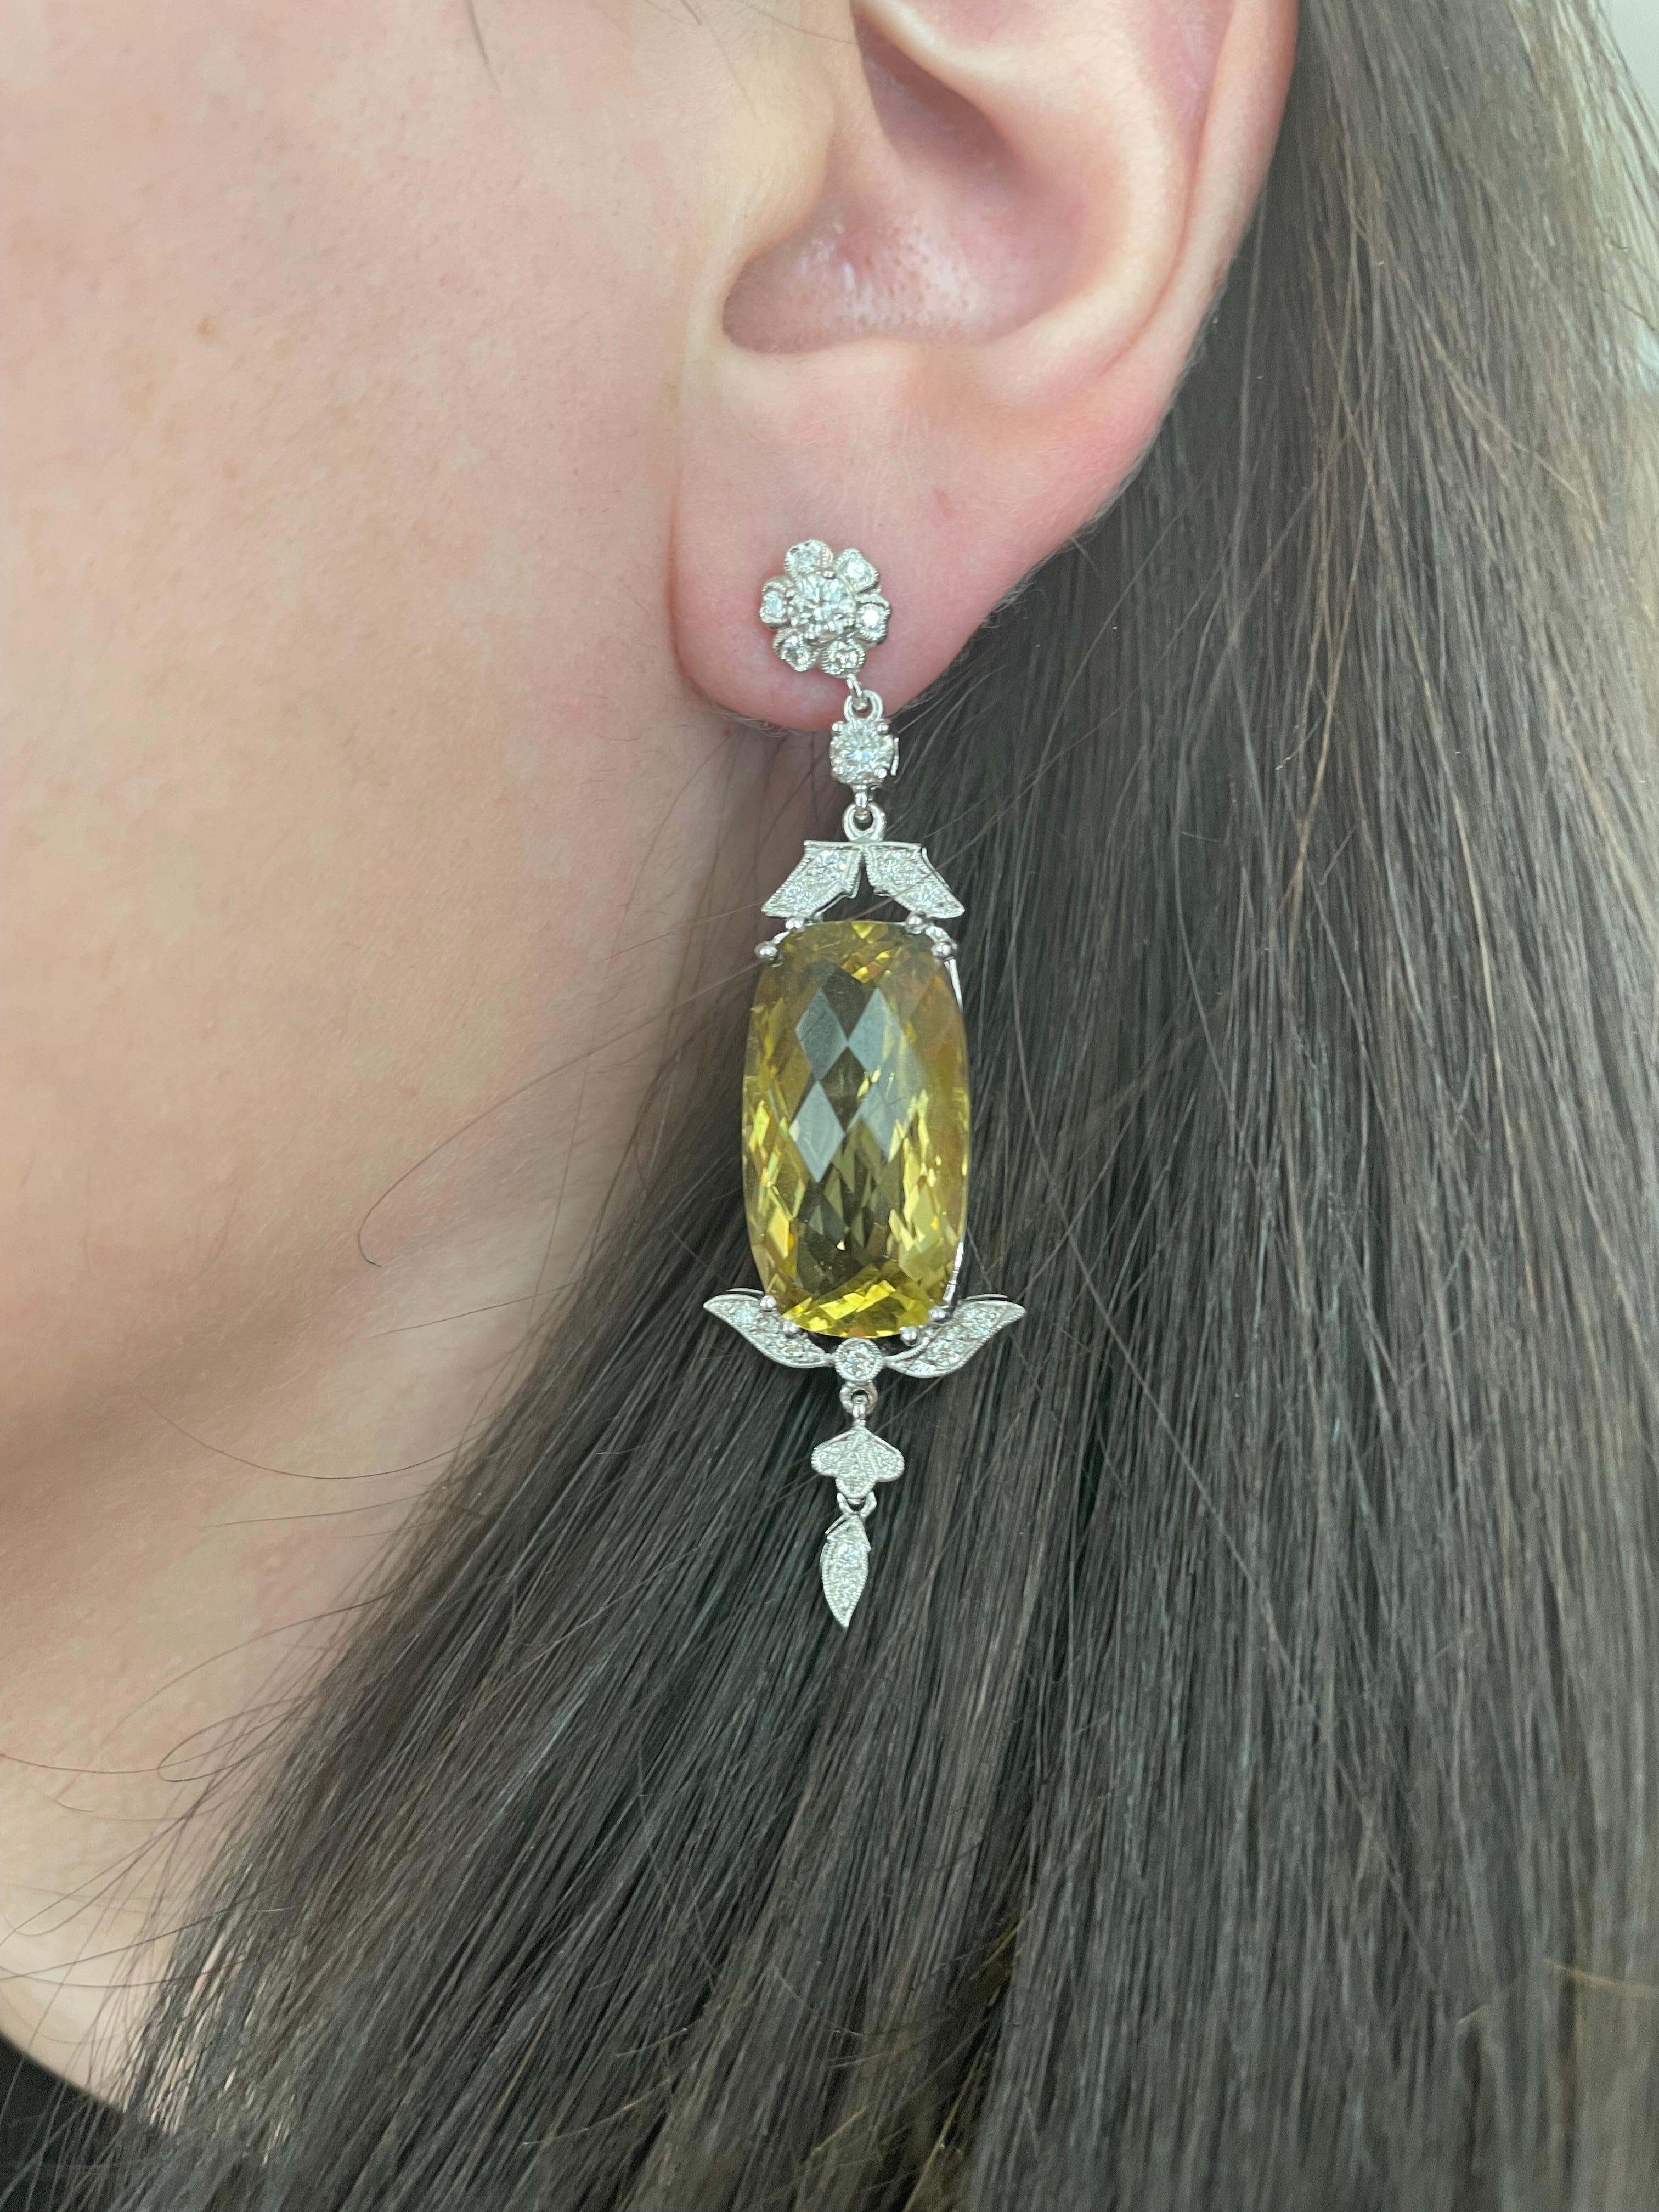 Lovely large lemon with diamond earrings.
2 lemon quartz, 34.18 carats total. Complimented by 44 round brilliant diamonds, 1.24 carats. Approximately H/I color and SI clarity. 18-karat white gold.
35.42 carats total gemstone weight.
Accommodated